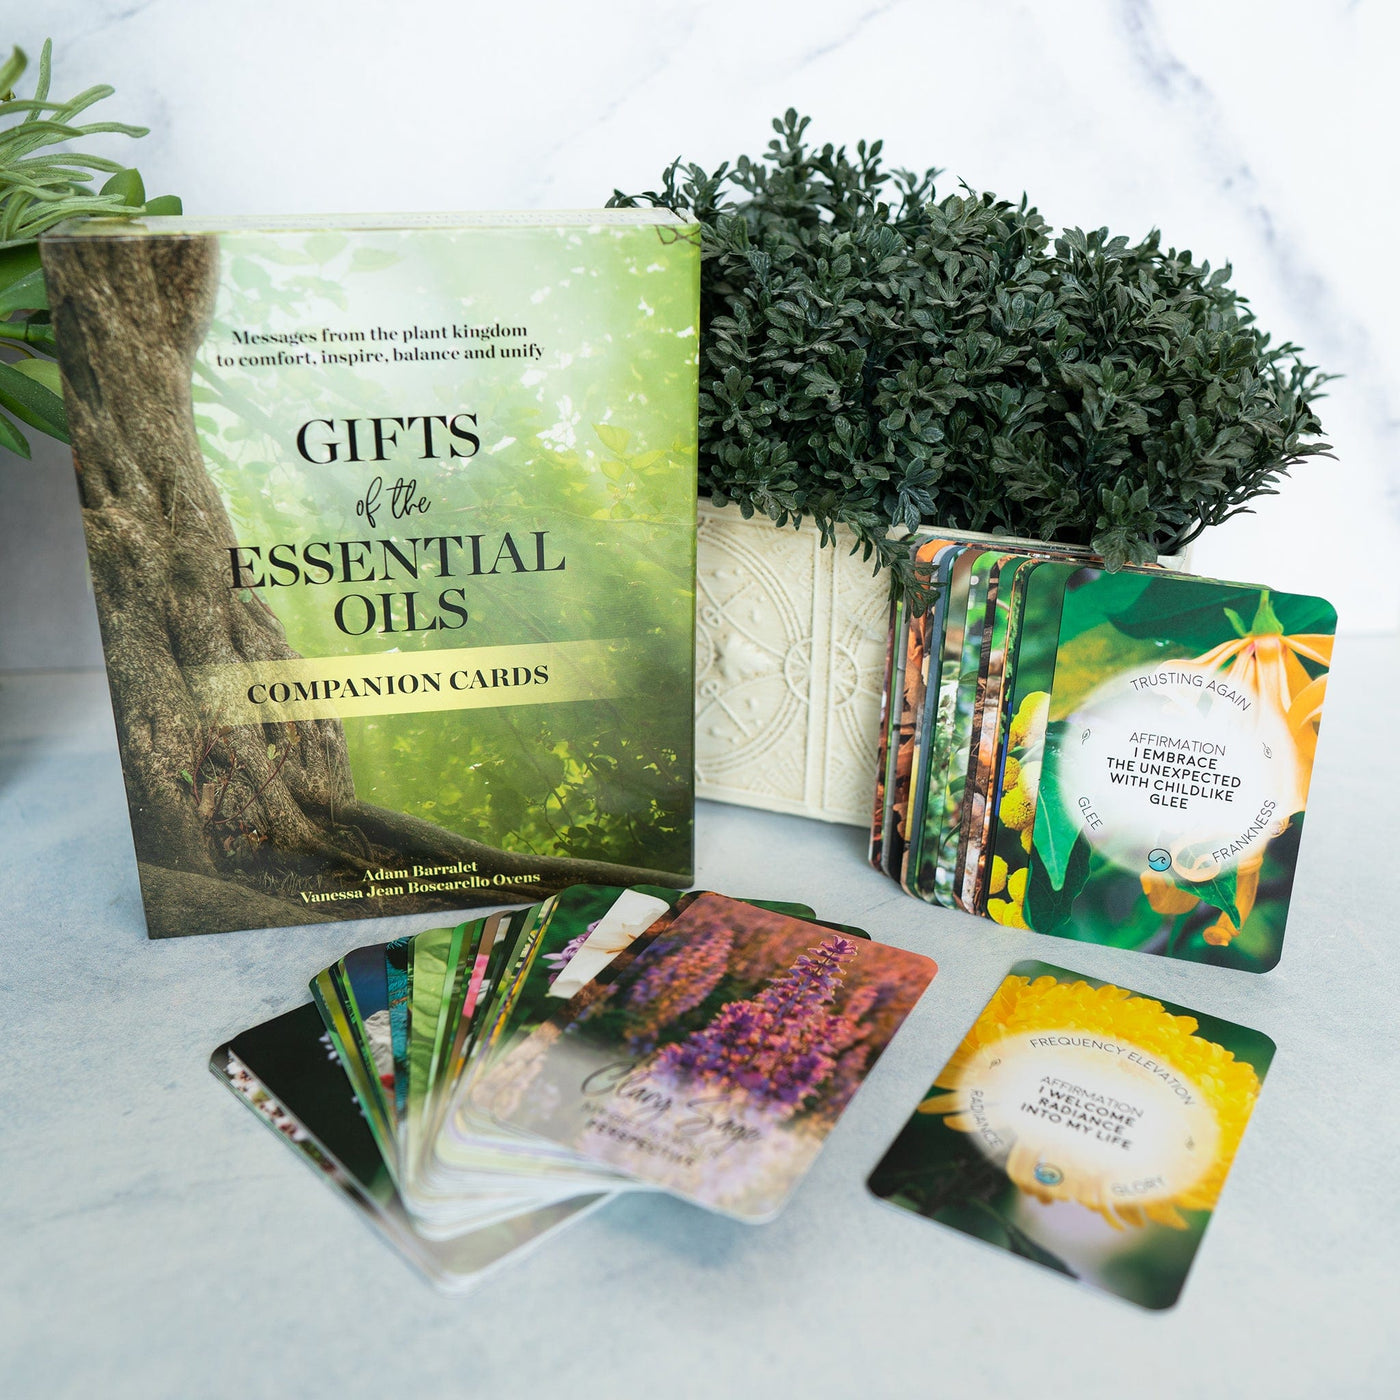 Gifts of the Essential Oils - Companion Cards - Oil Life Canada - Canada's Best Essential Oil Supplies